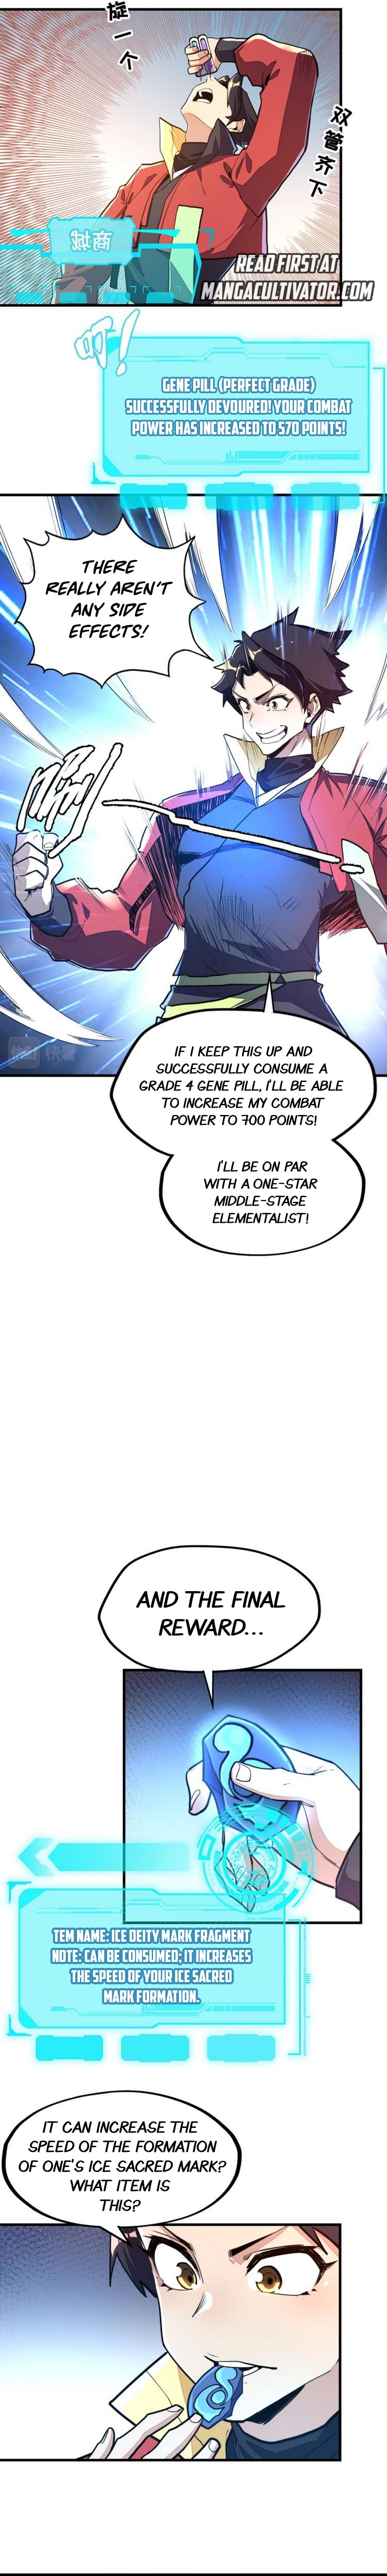 Global Power: I Can Control All The Elements - Page 2